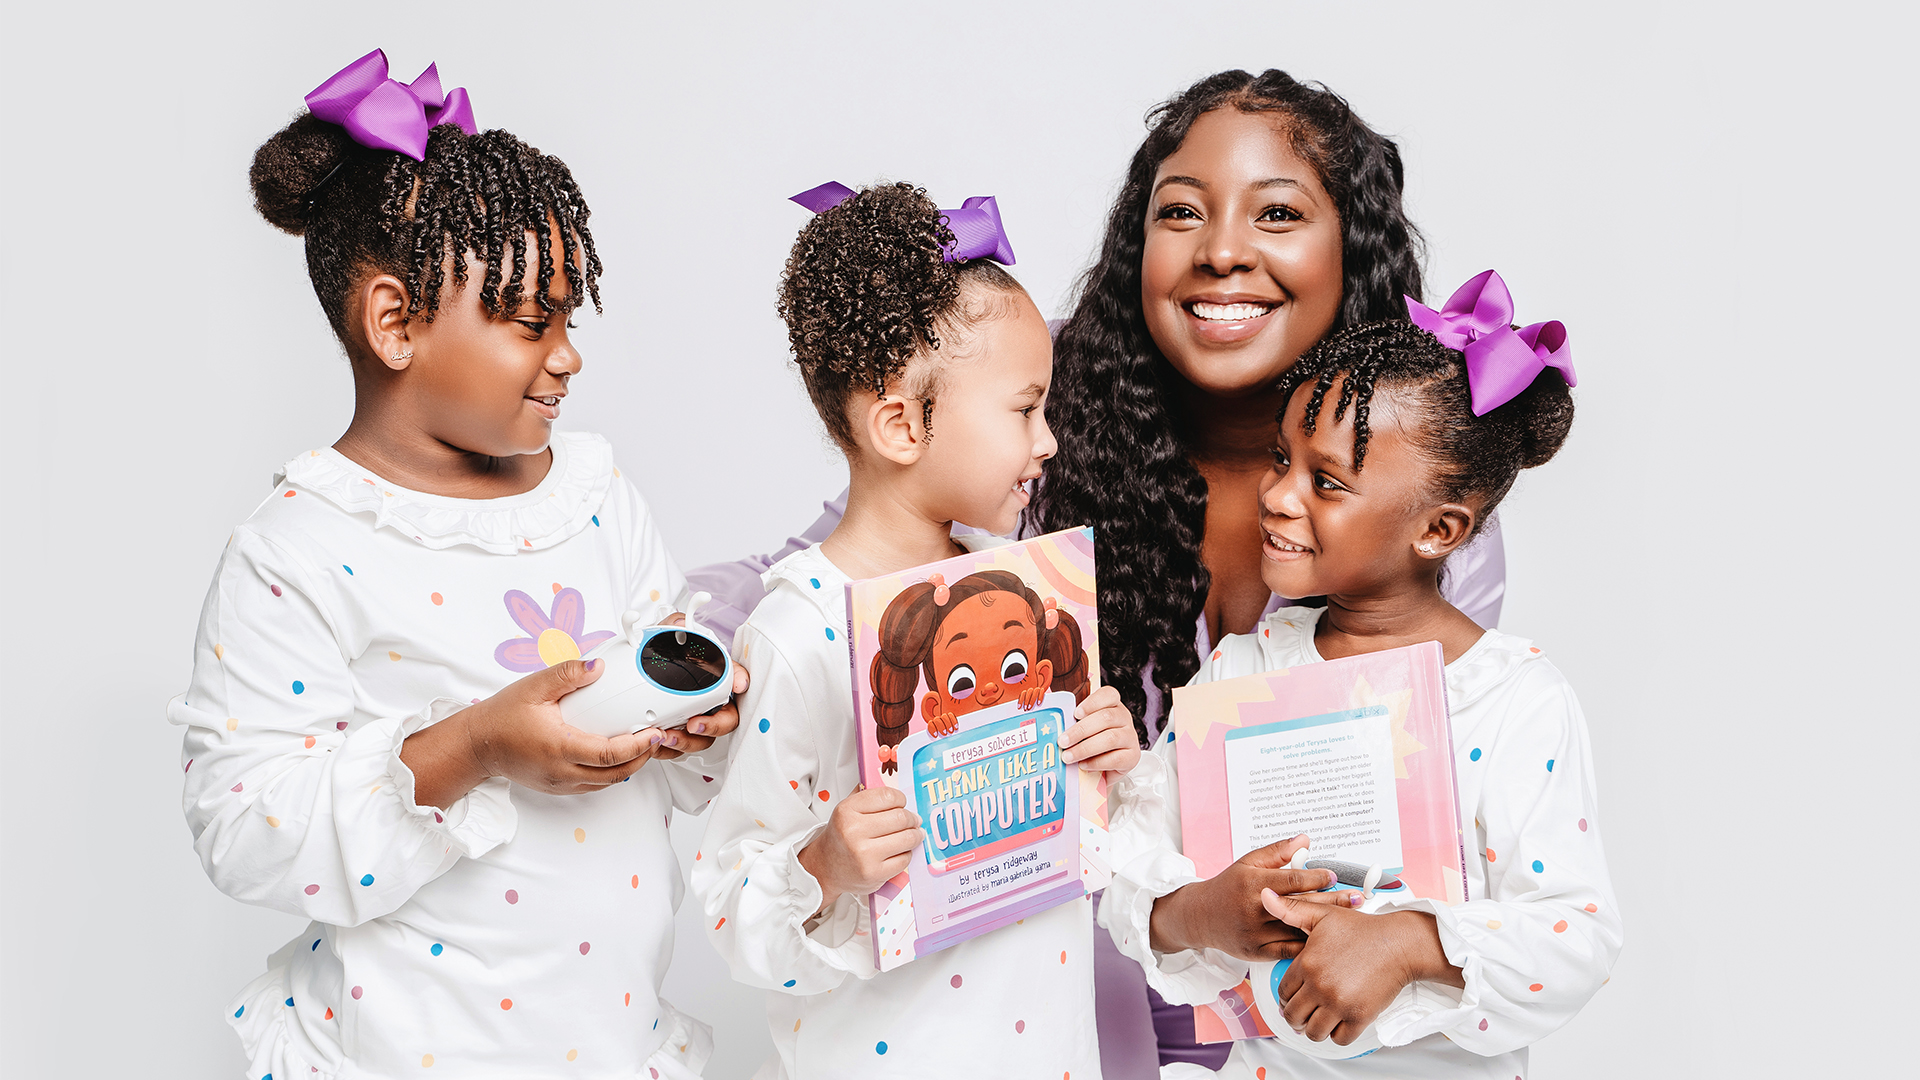 Google Technical Program Manager Terysa Ridgeway To Make Coding Fun With The Launch Of An Educational Toy Robot For Children